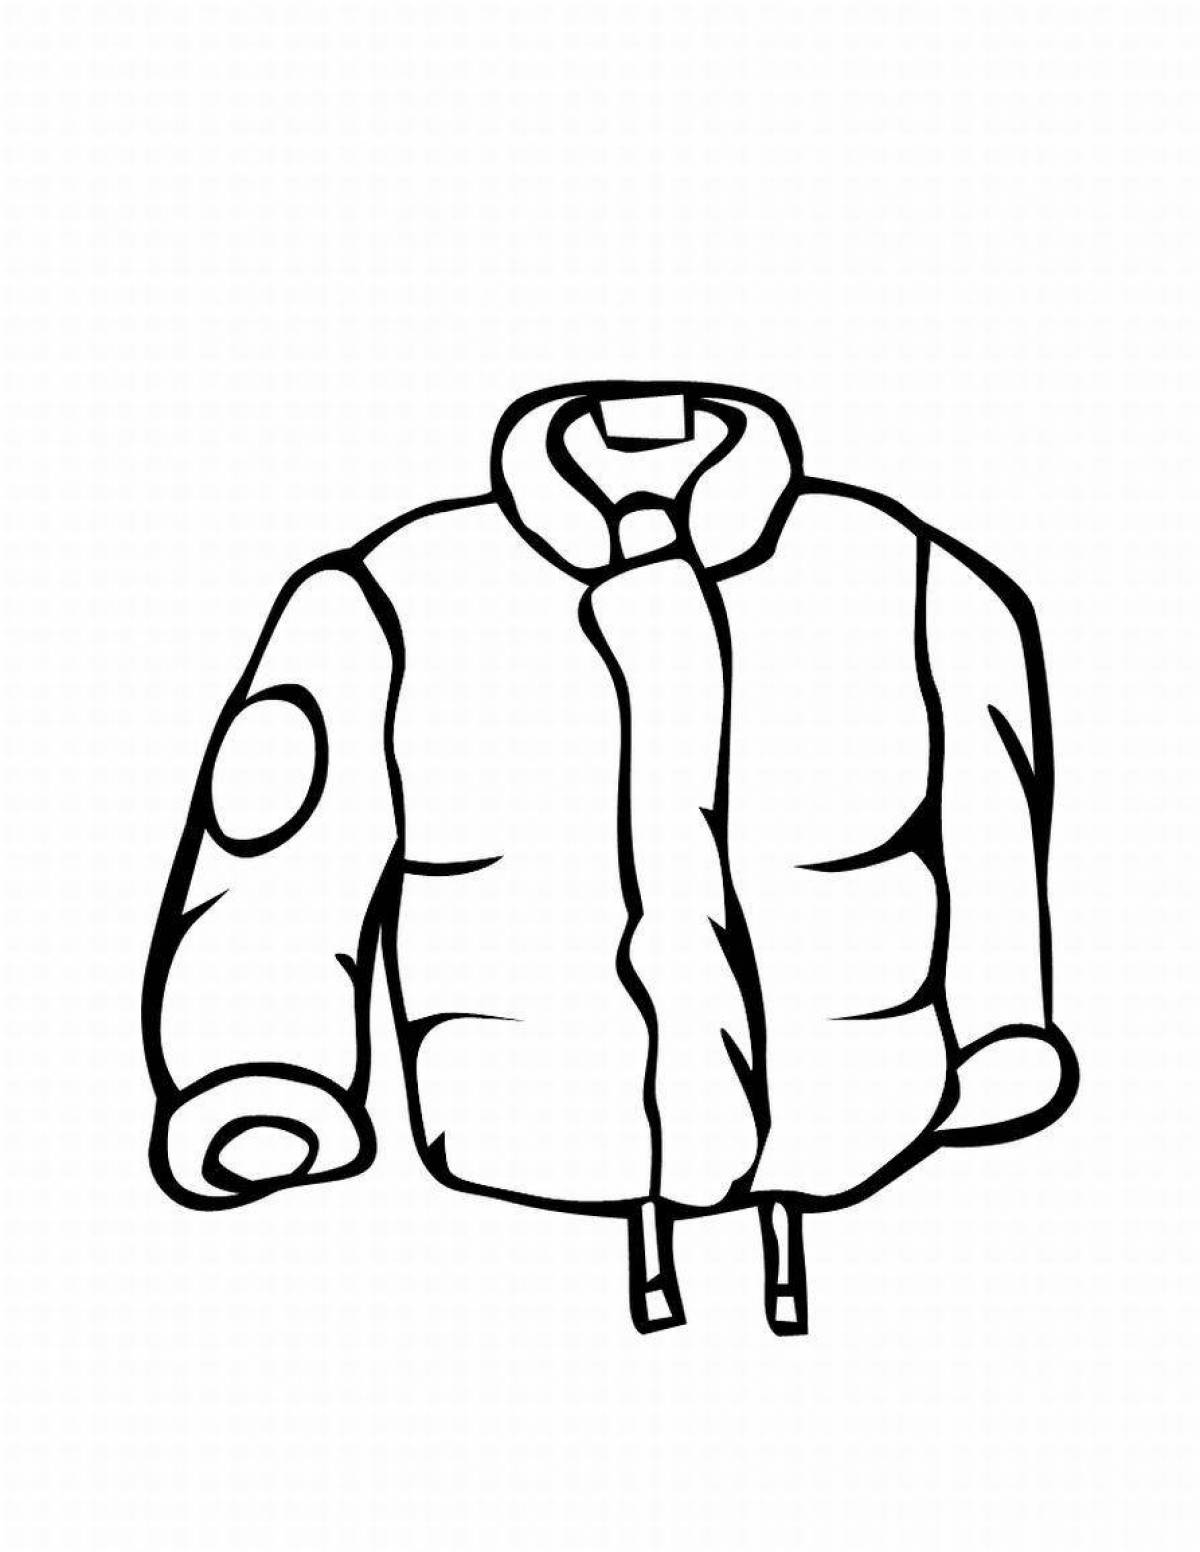 Coloring page adorable jacket